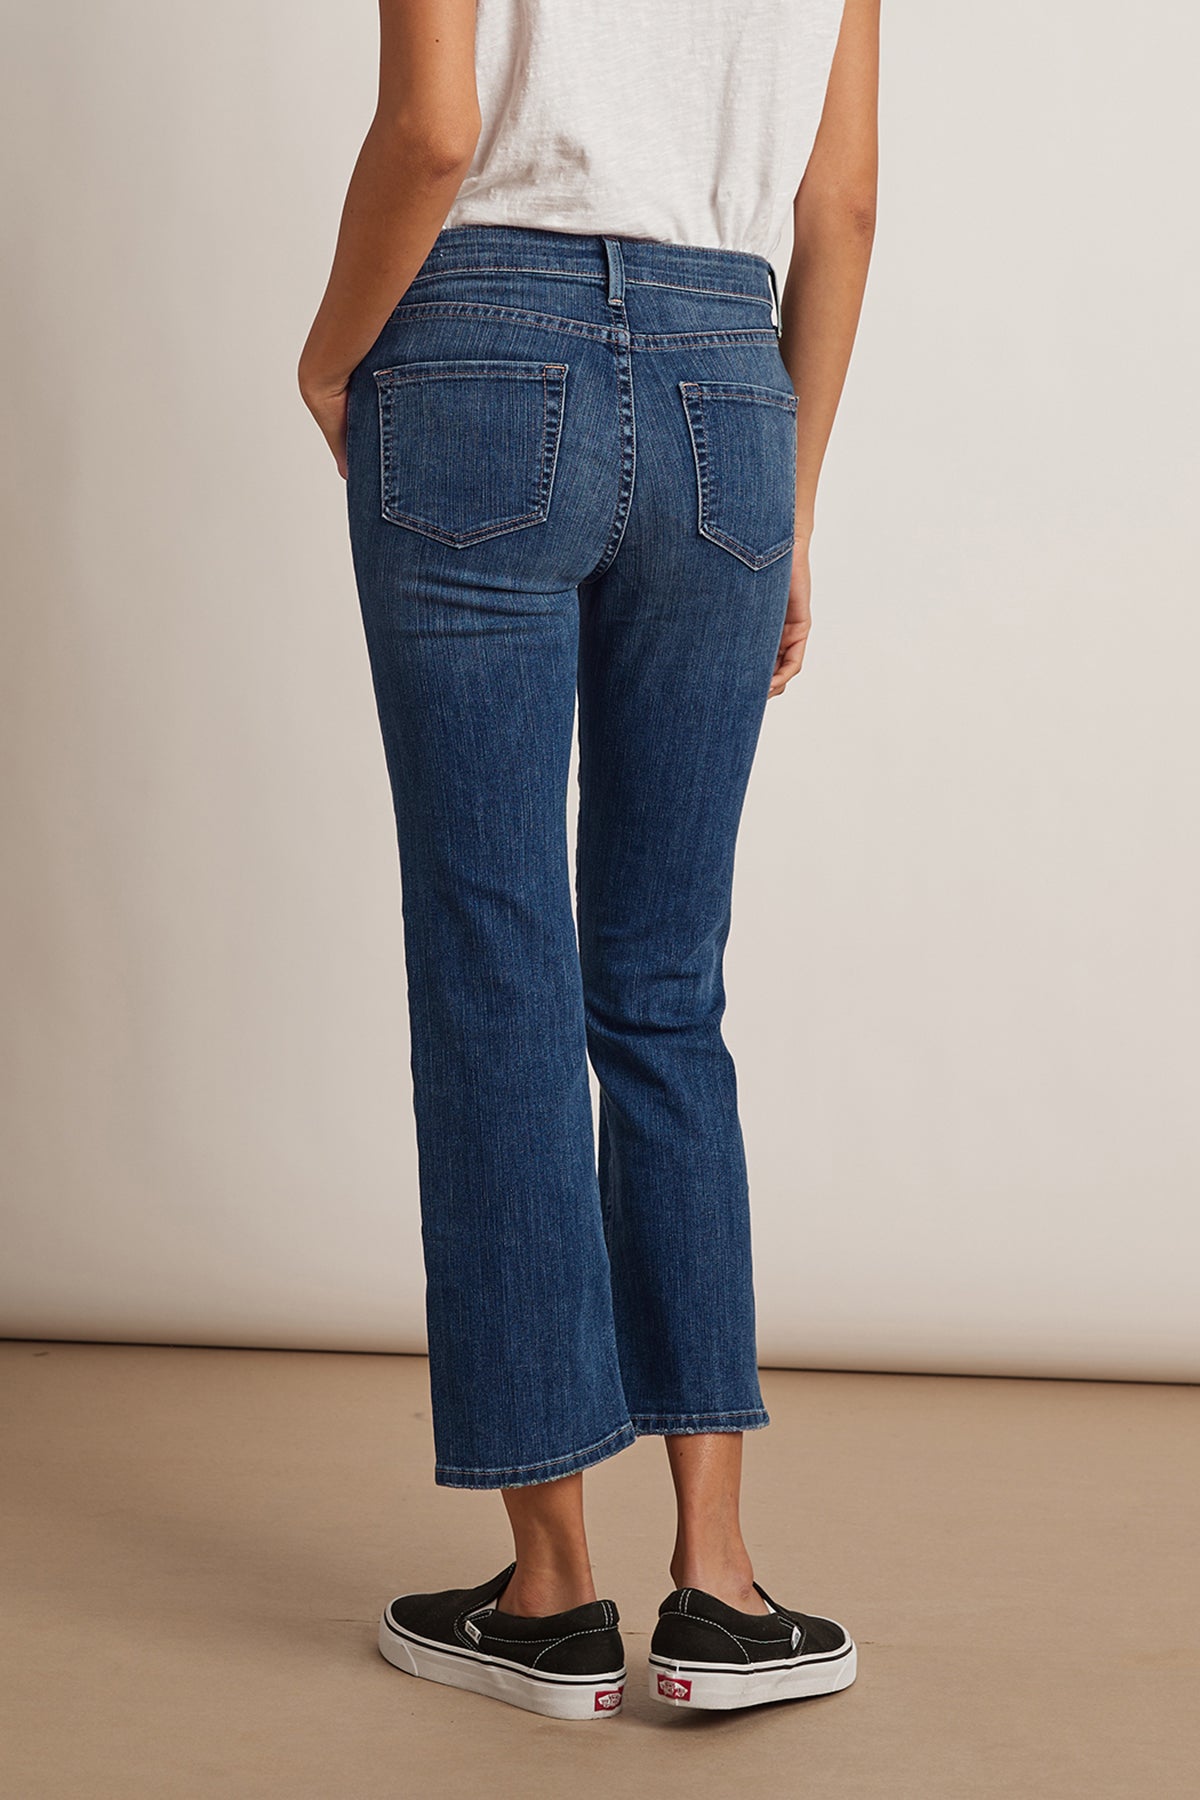   The view of a woman wearing a pair of Velvet by Graham & Spencer KATE HIGH RISE CROP JEAN showcases the denim fabric and waistline. 